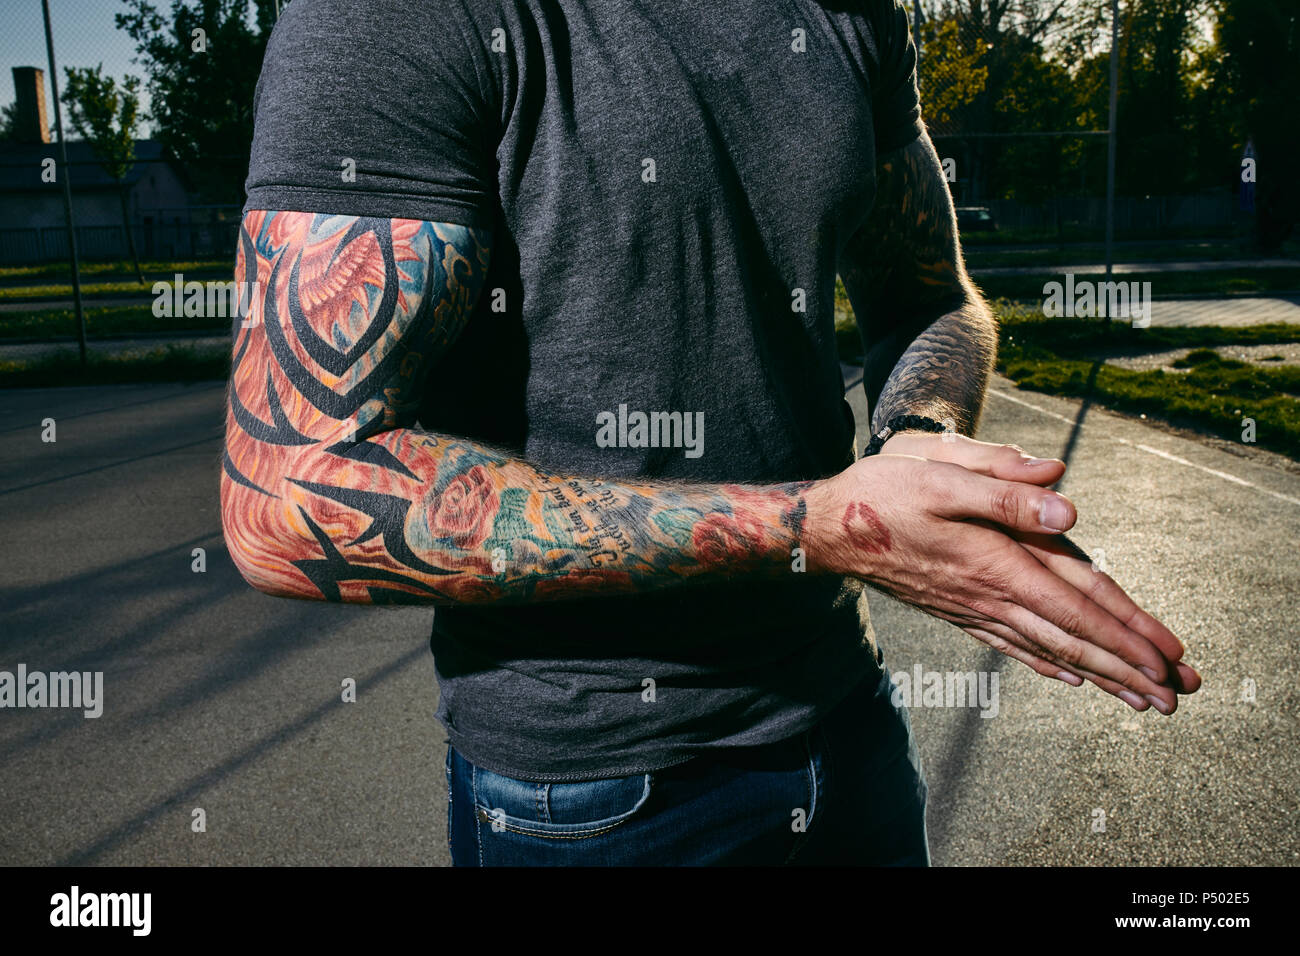 Tattooed arms of a young man outdoors Stock Photo